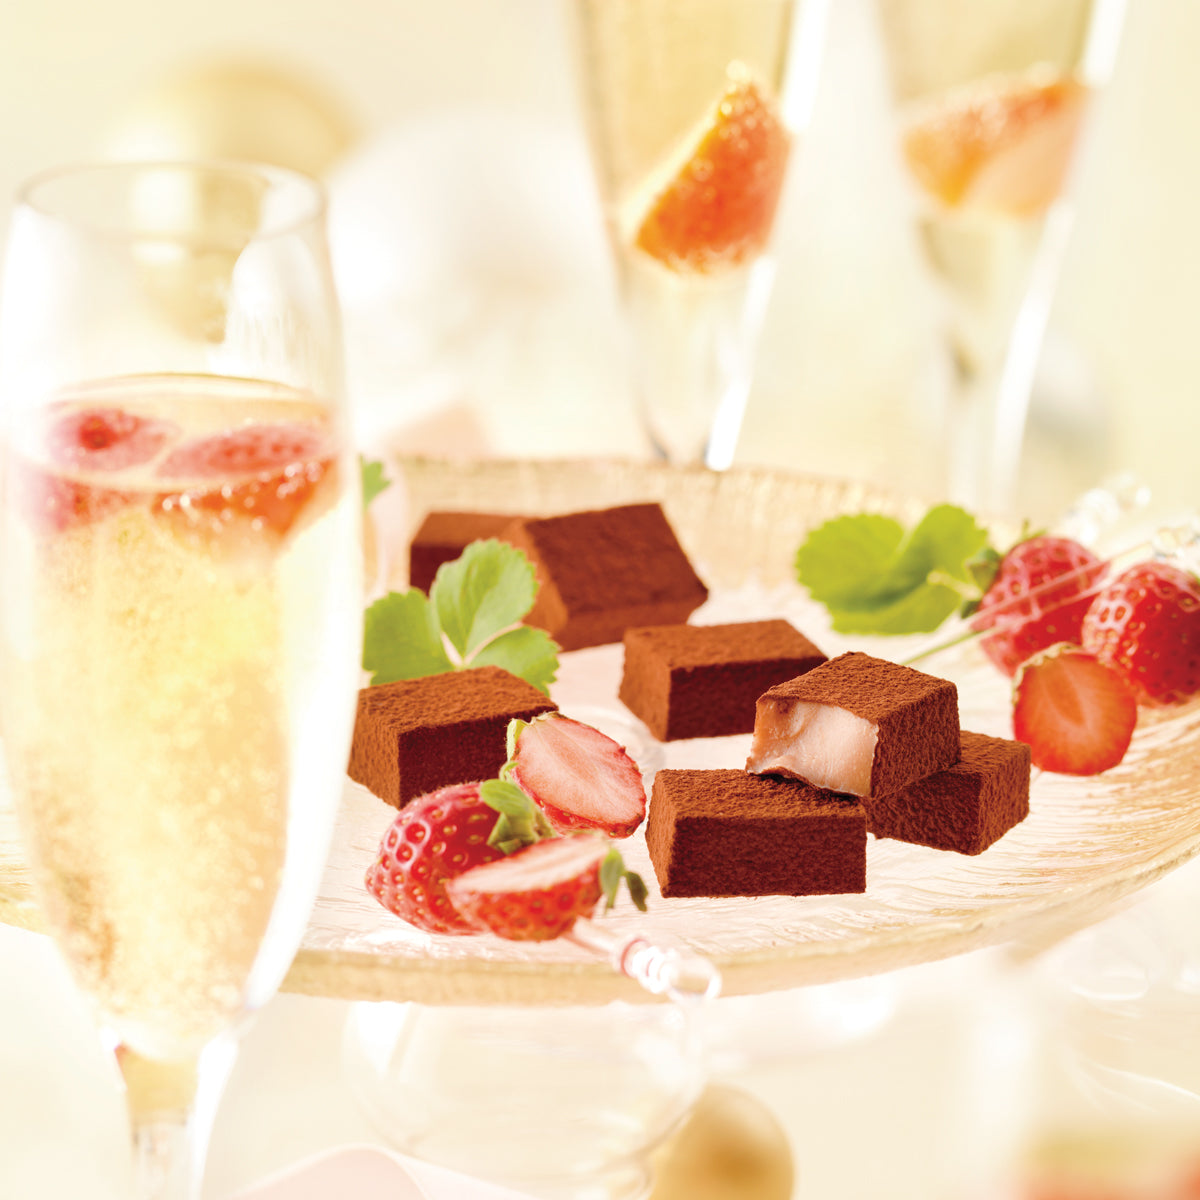 Image shows brown chocolate blocks on a clear plate with red strawberries and green leaves. Accents include champagne glasses filled with champagne and red strawberries. Background is in white.